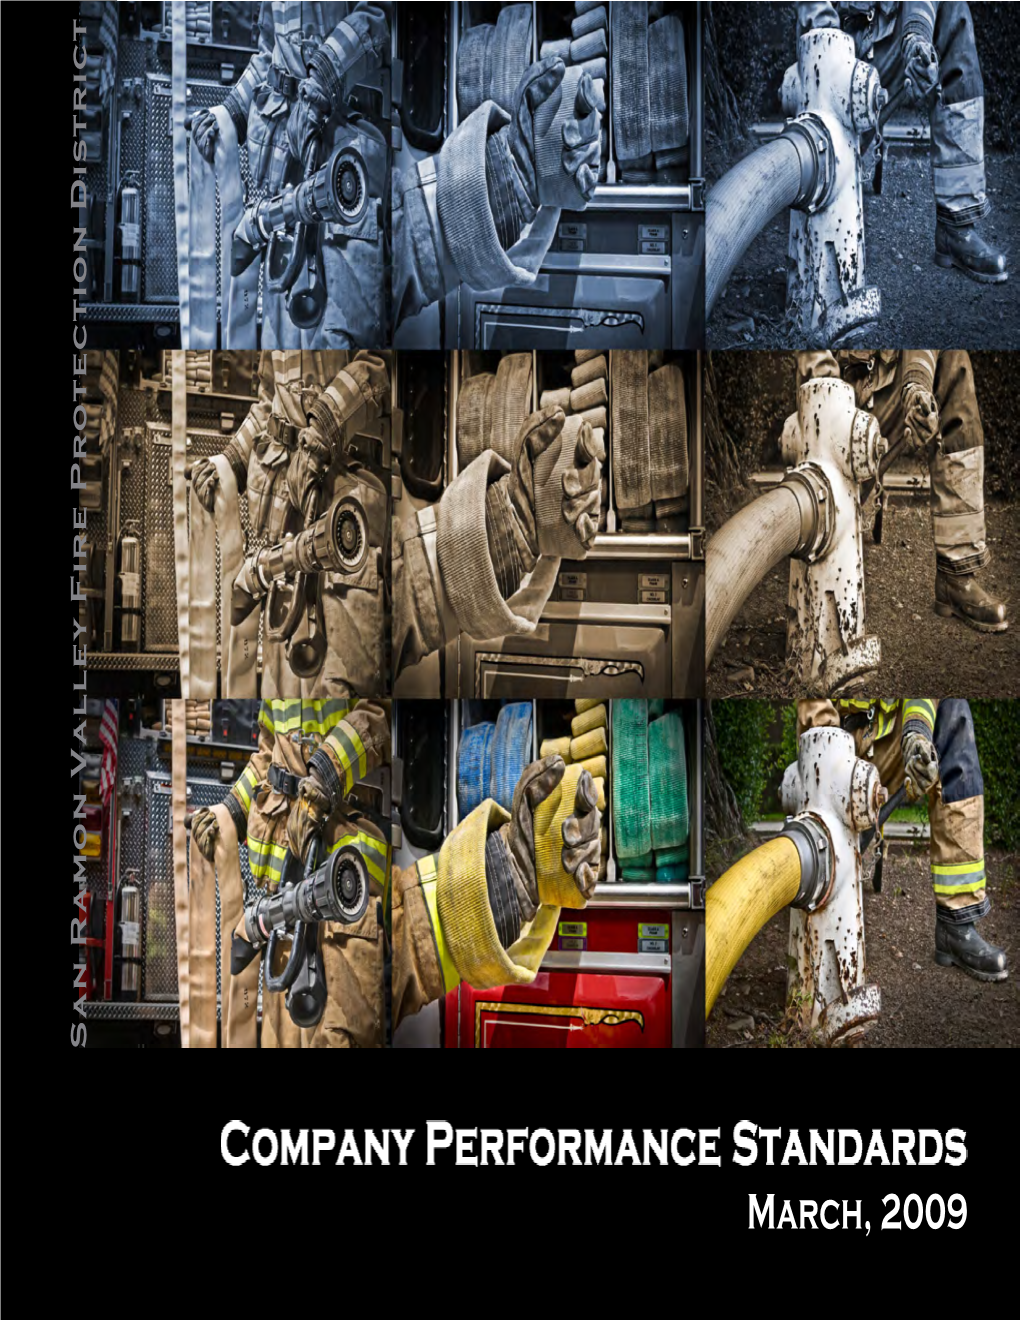 Company Performance Standards, March 2009